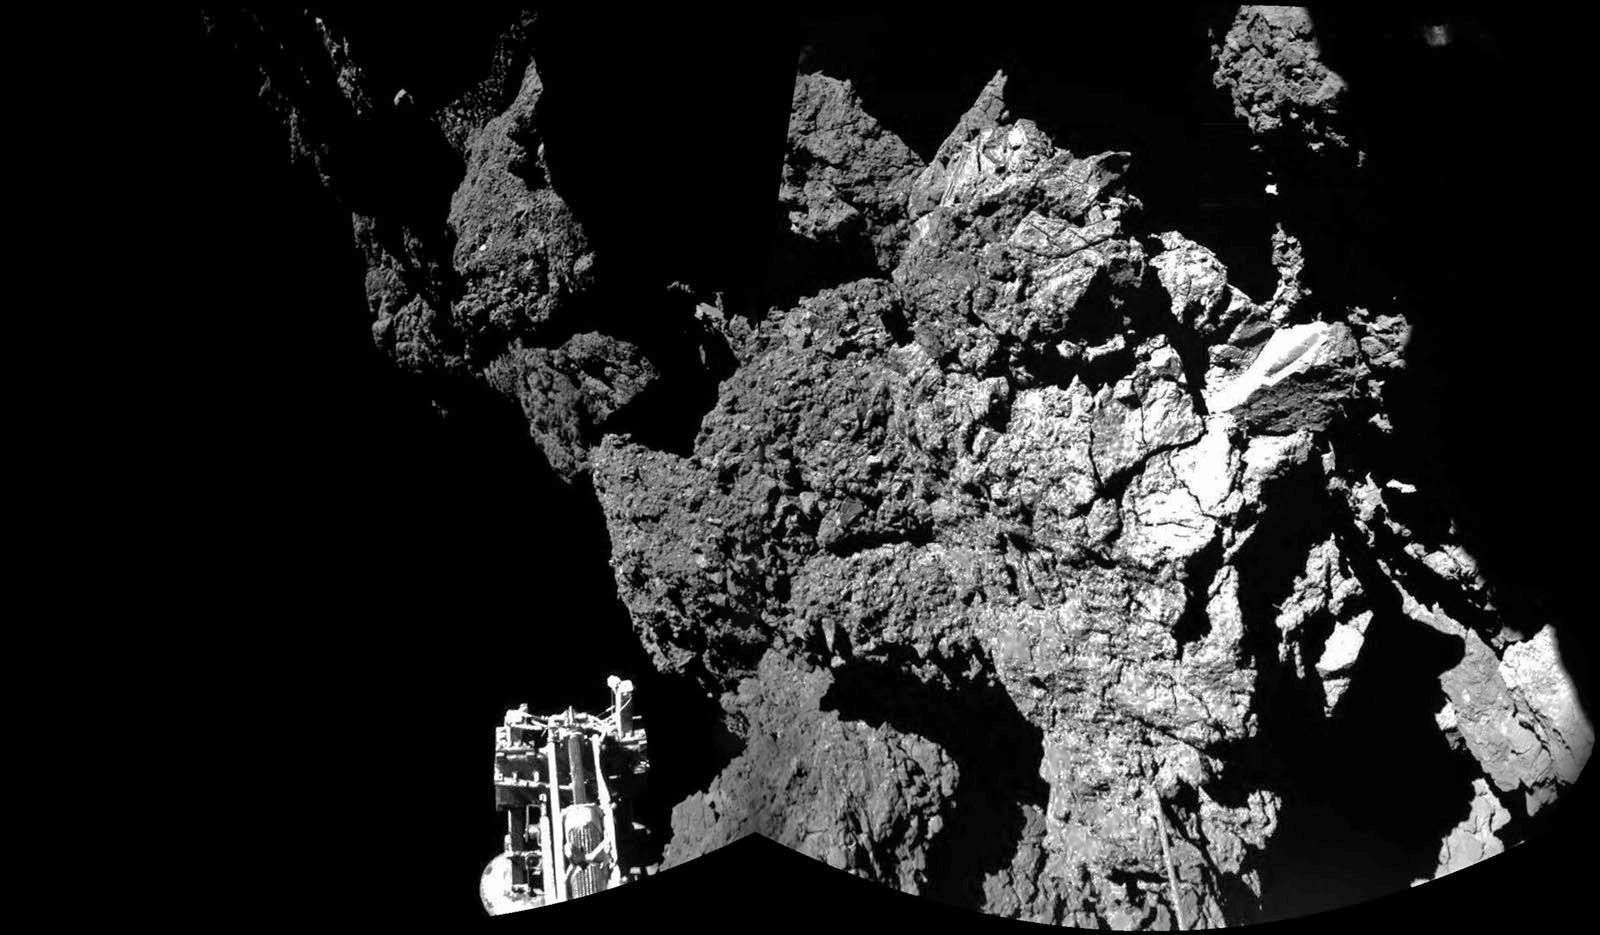 Comet lander Philae says goodbye as communications are cut